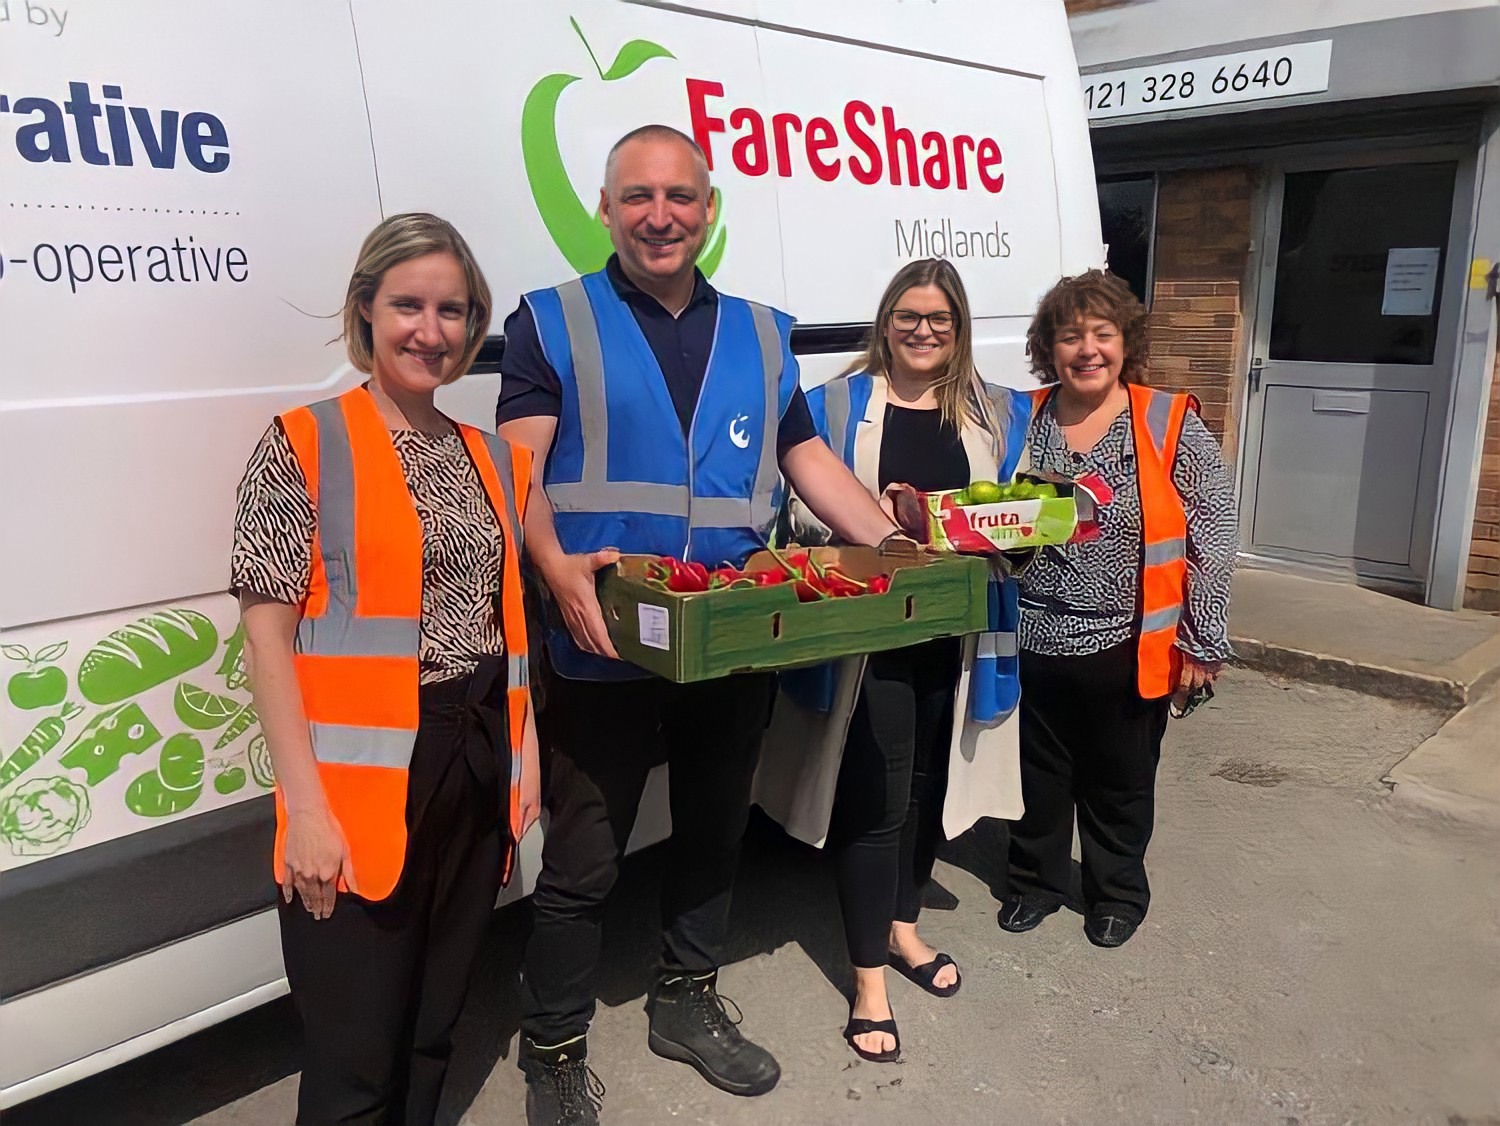 Partnering with FareShare Midlands to serve up local food poverty support